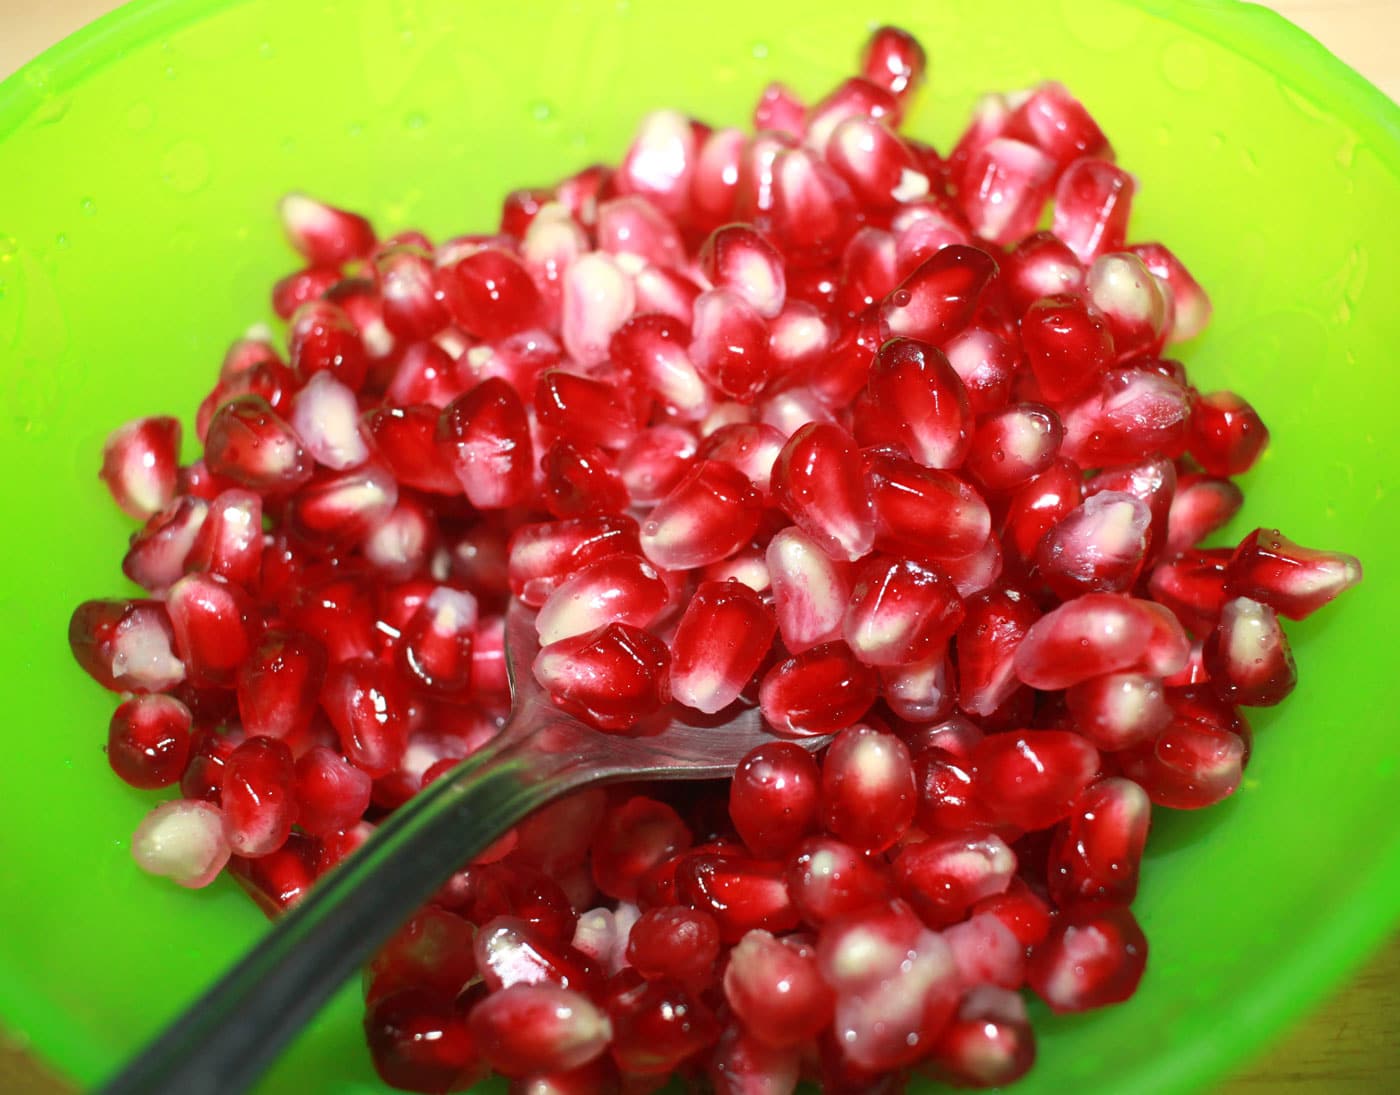 How Do You Know If Pomegranate Seeds Are Bad